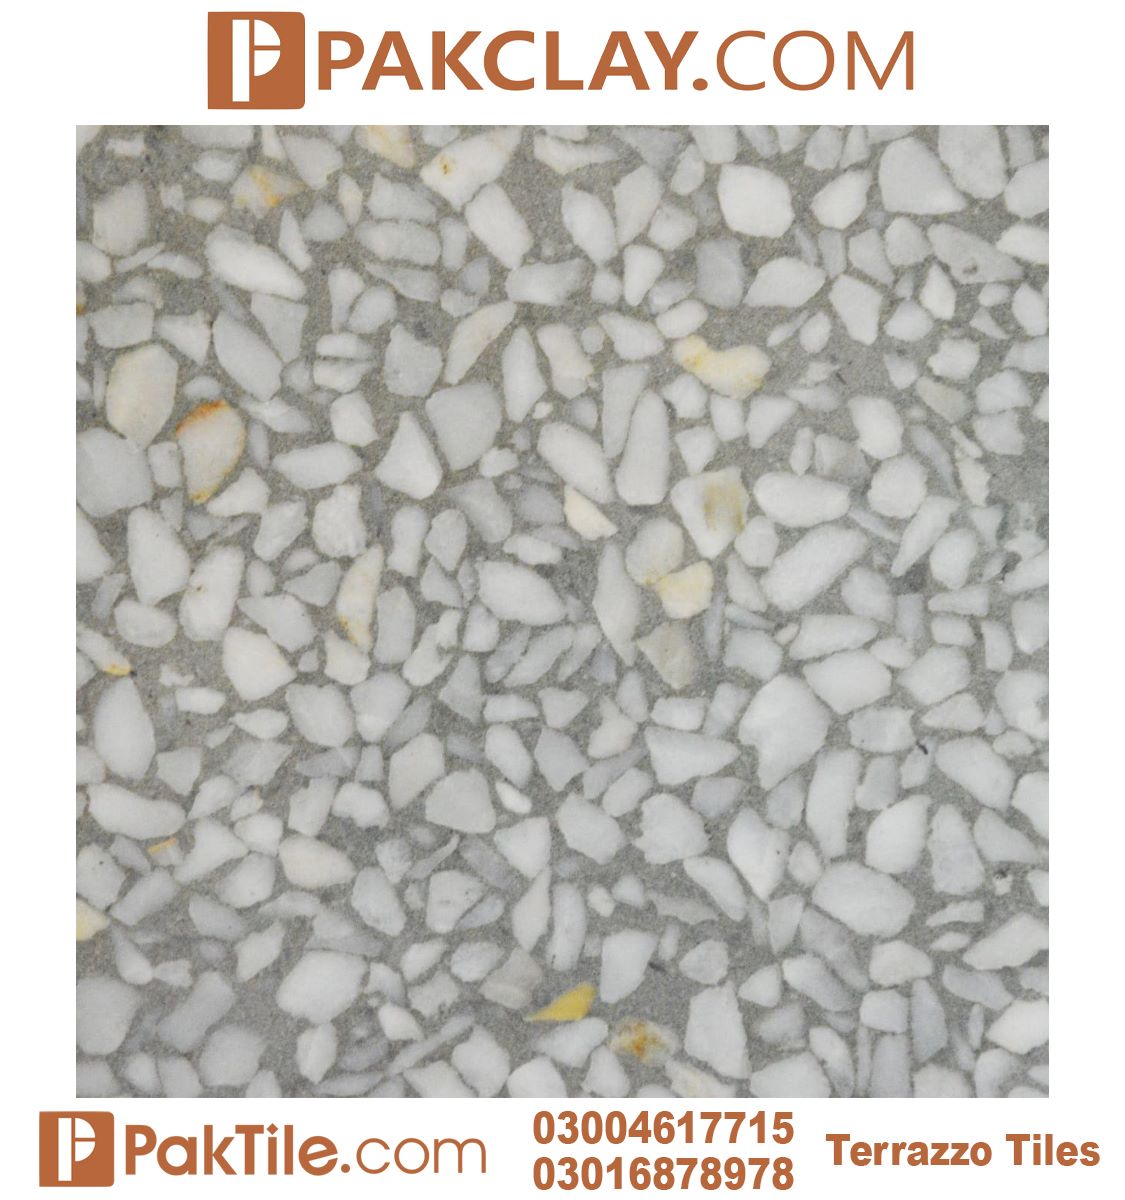 Chips Tiles Rate in Pakistan